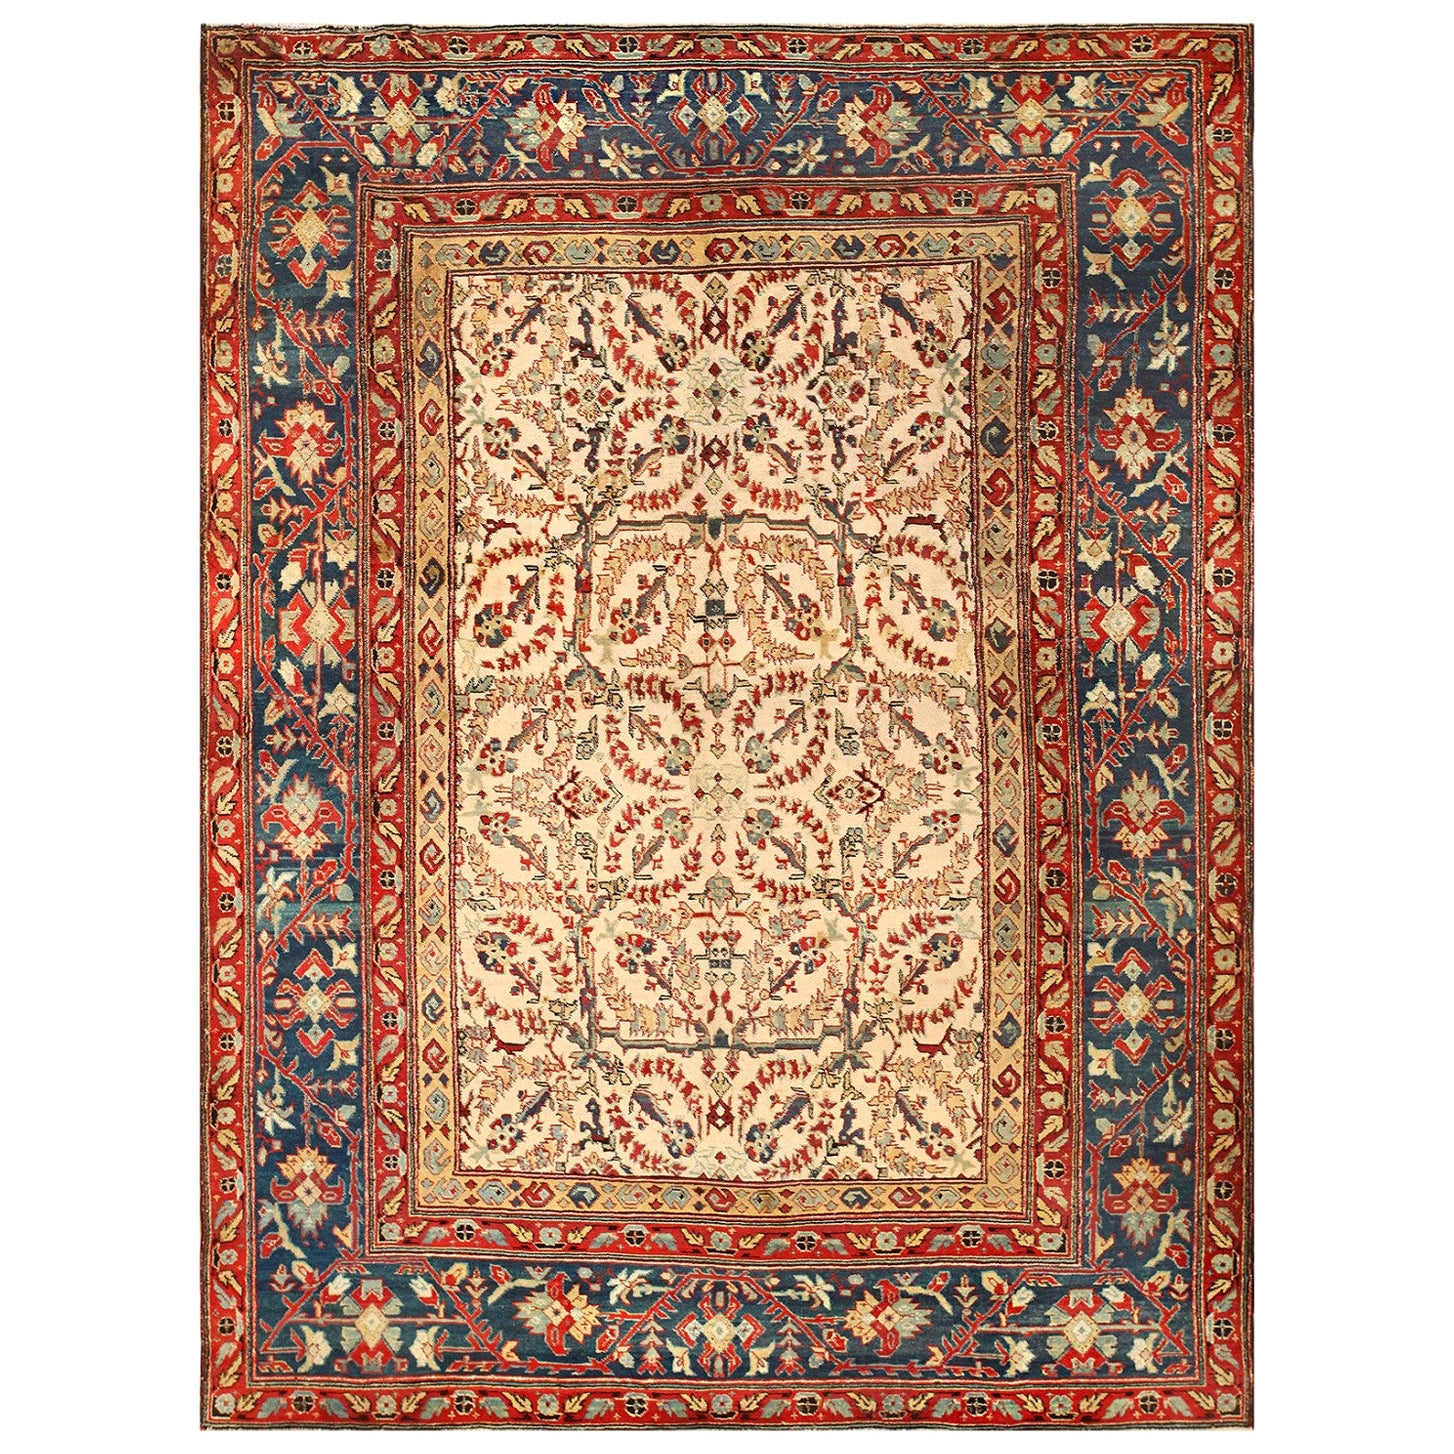 Nazmiyal Collection Antique Indian Agra Rug. Size: 7 ft 5 in x 9 ft 9 in